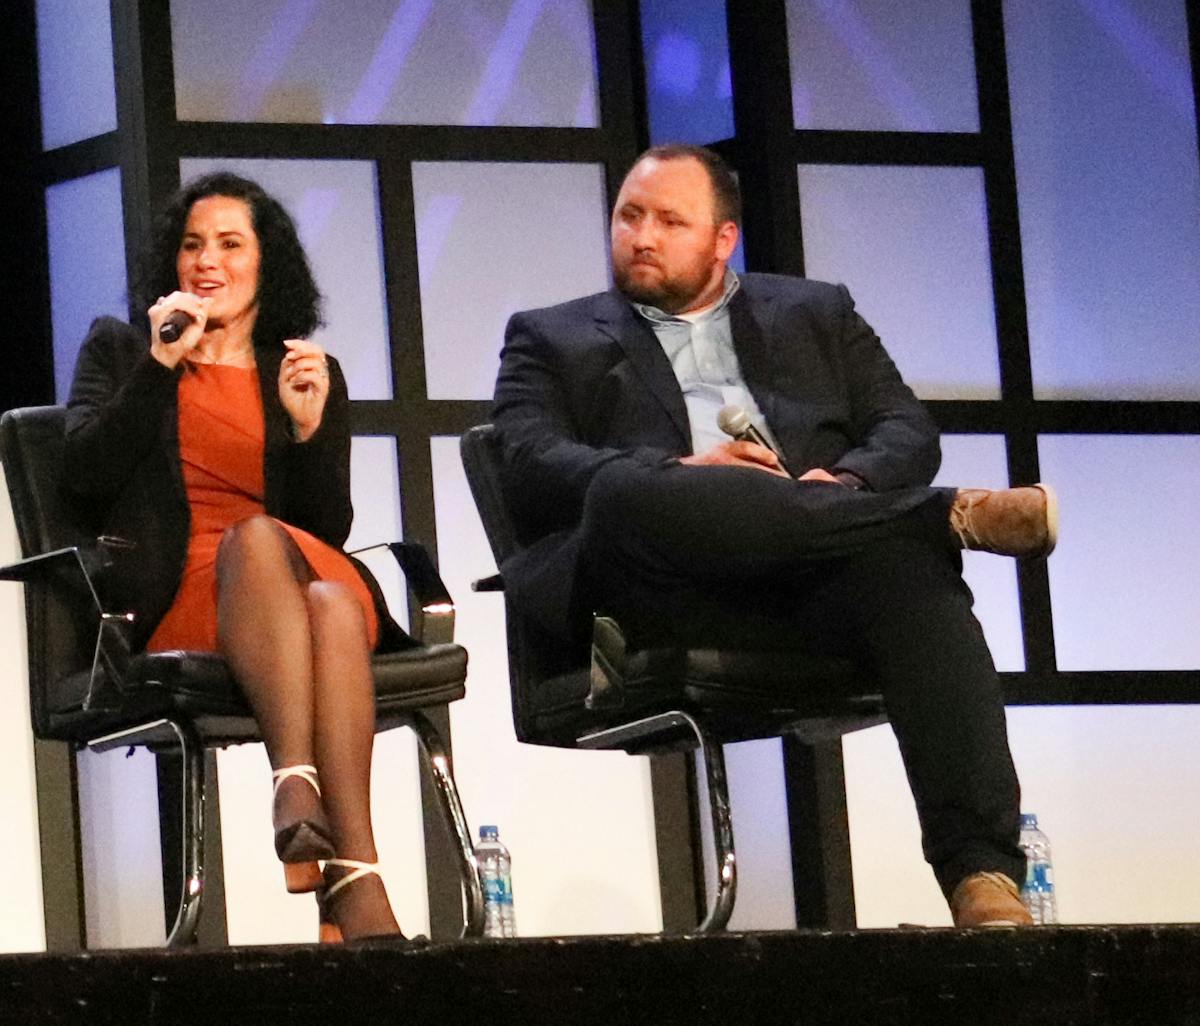 Tanya Miracle, director of OE truck/trailer at Bridgestone, and CJ Biank, global market manager (networks), Grote Industries, discuss the best ways to find and mentor future leaders.